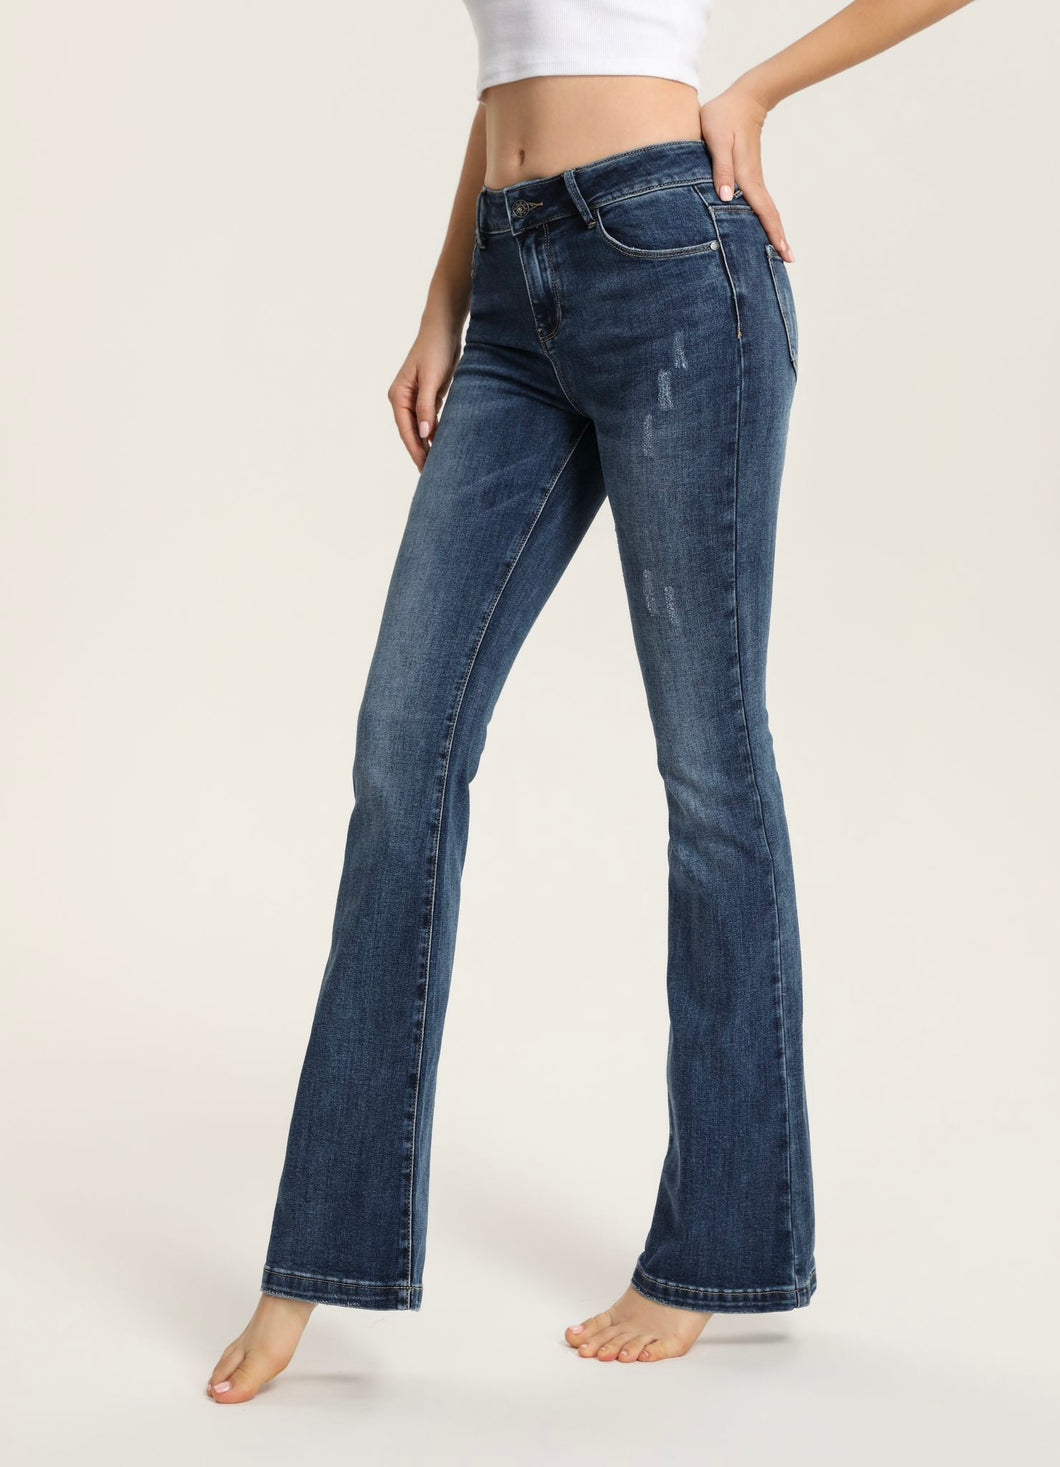 Melly denim flared jeans